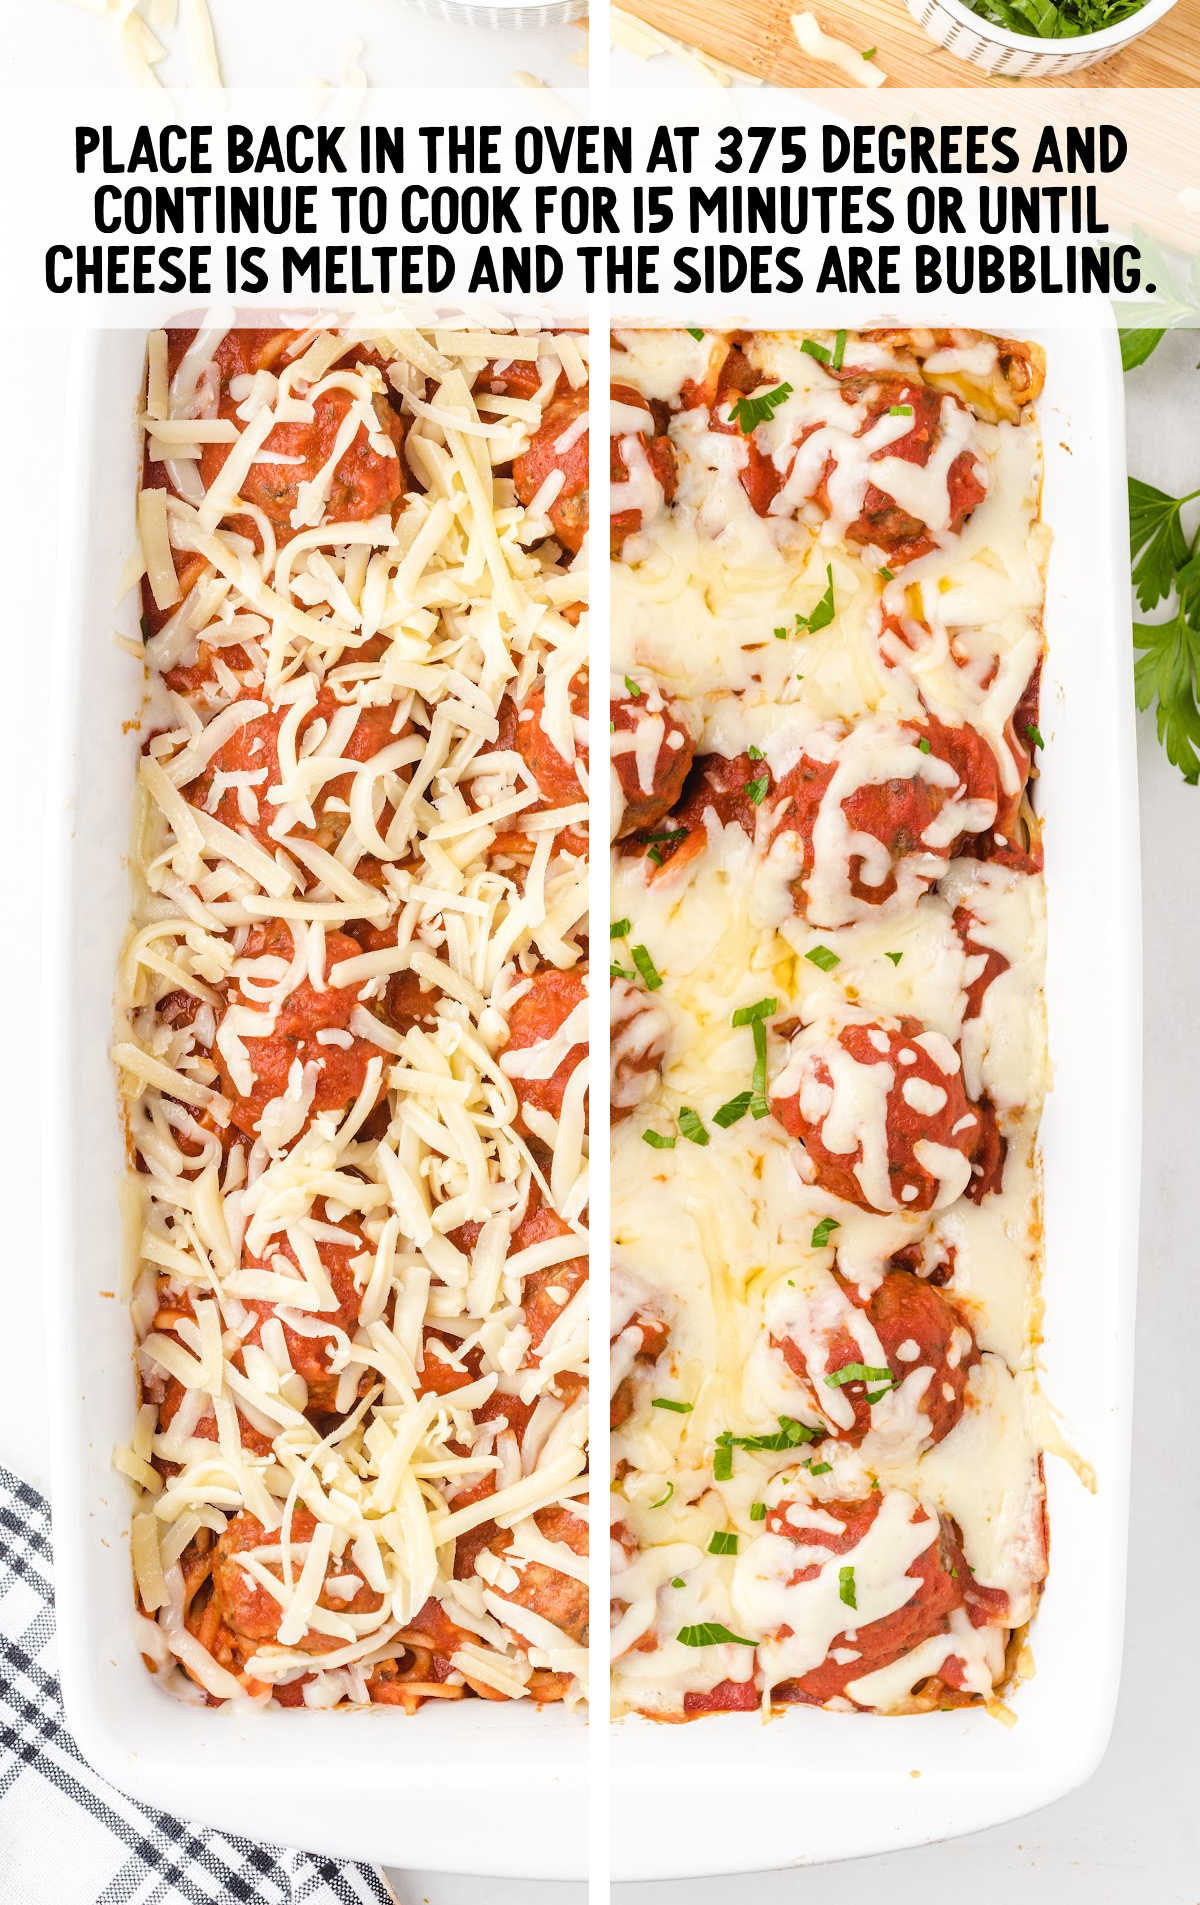 Baked Spaghetti and Meatballs in a baking dish and then baked